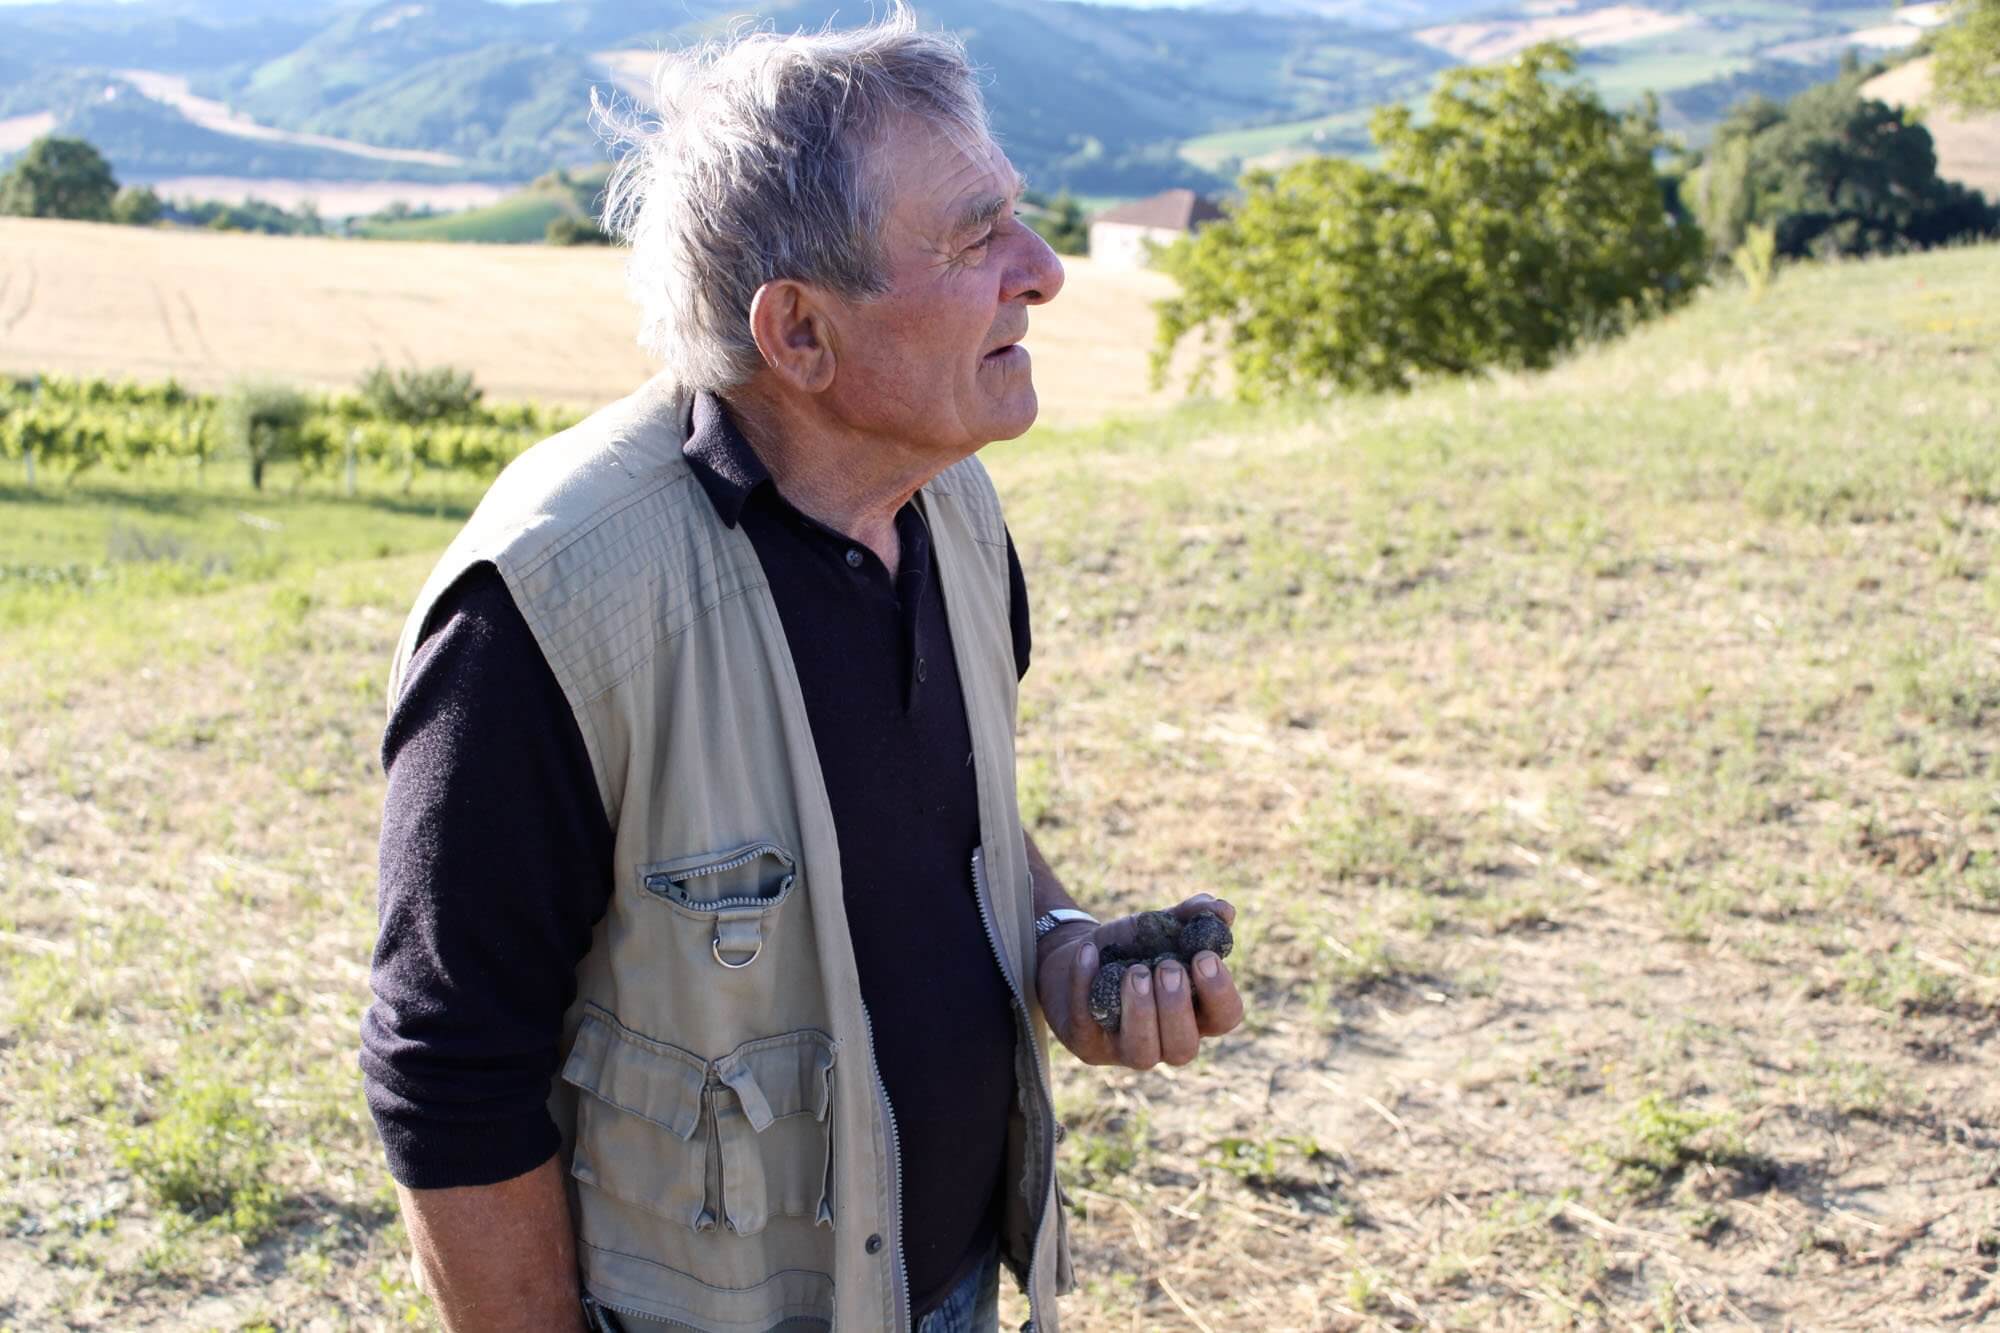 Hunting for truffles in Le Marche, Italy